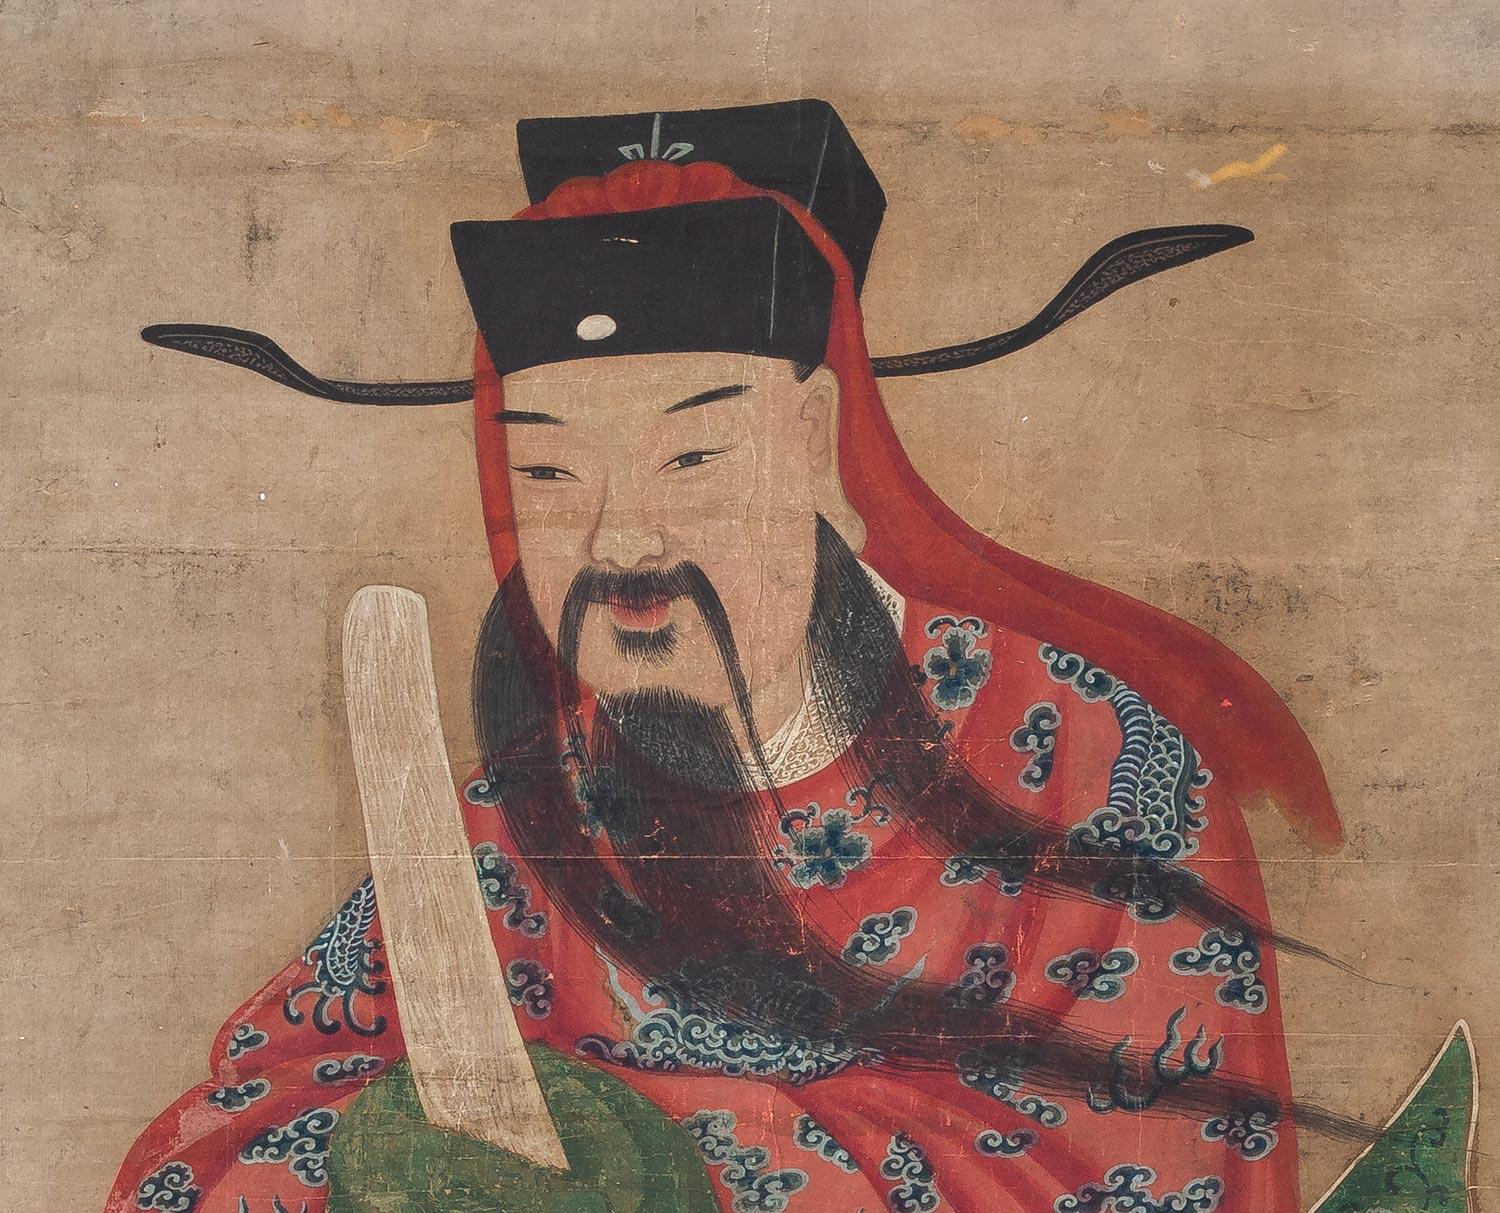 Large Chinese painting of a Chinese Lohan with flowing hair, mustache, beard and black headdress, wearing a colorful red loosely draped robe decorated with blue dragons and flowers, green lining, holding an ivory sword. There is a shield enclosing